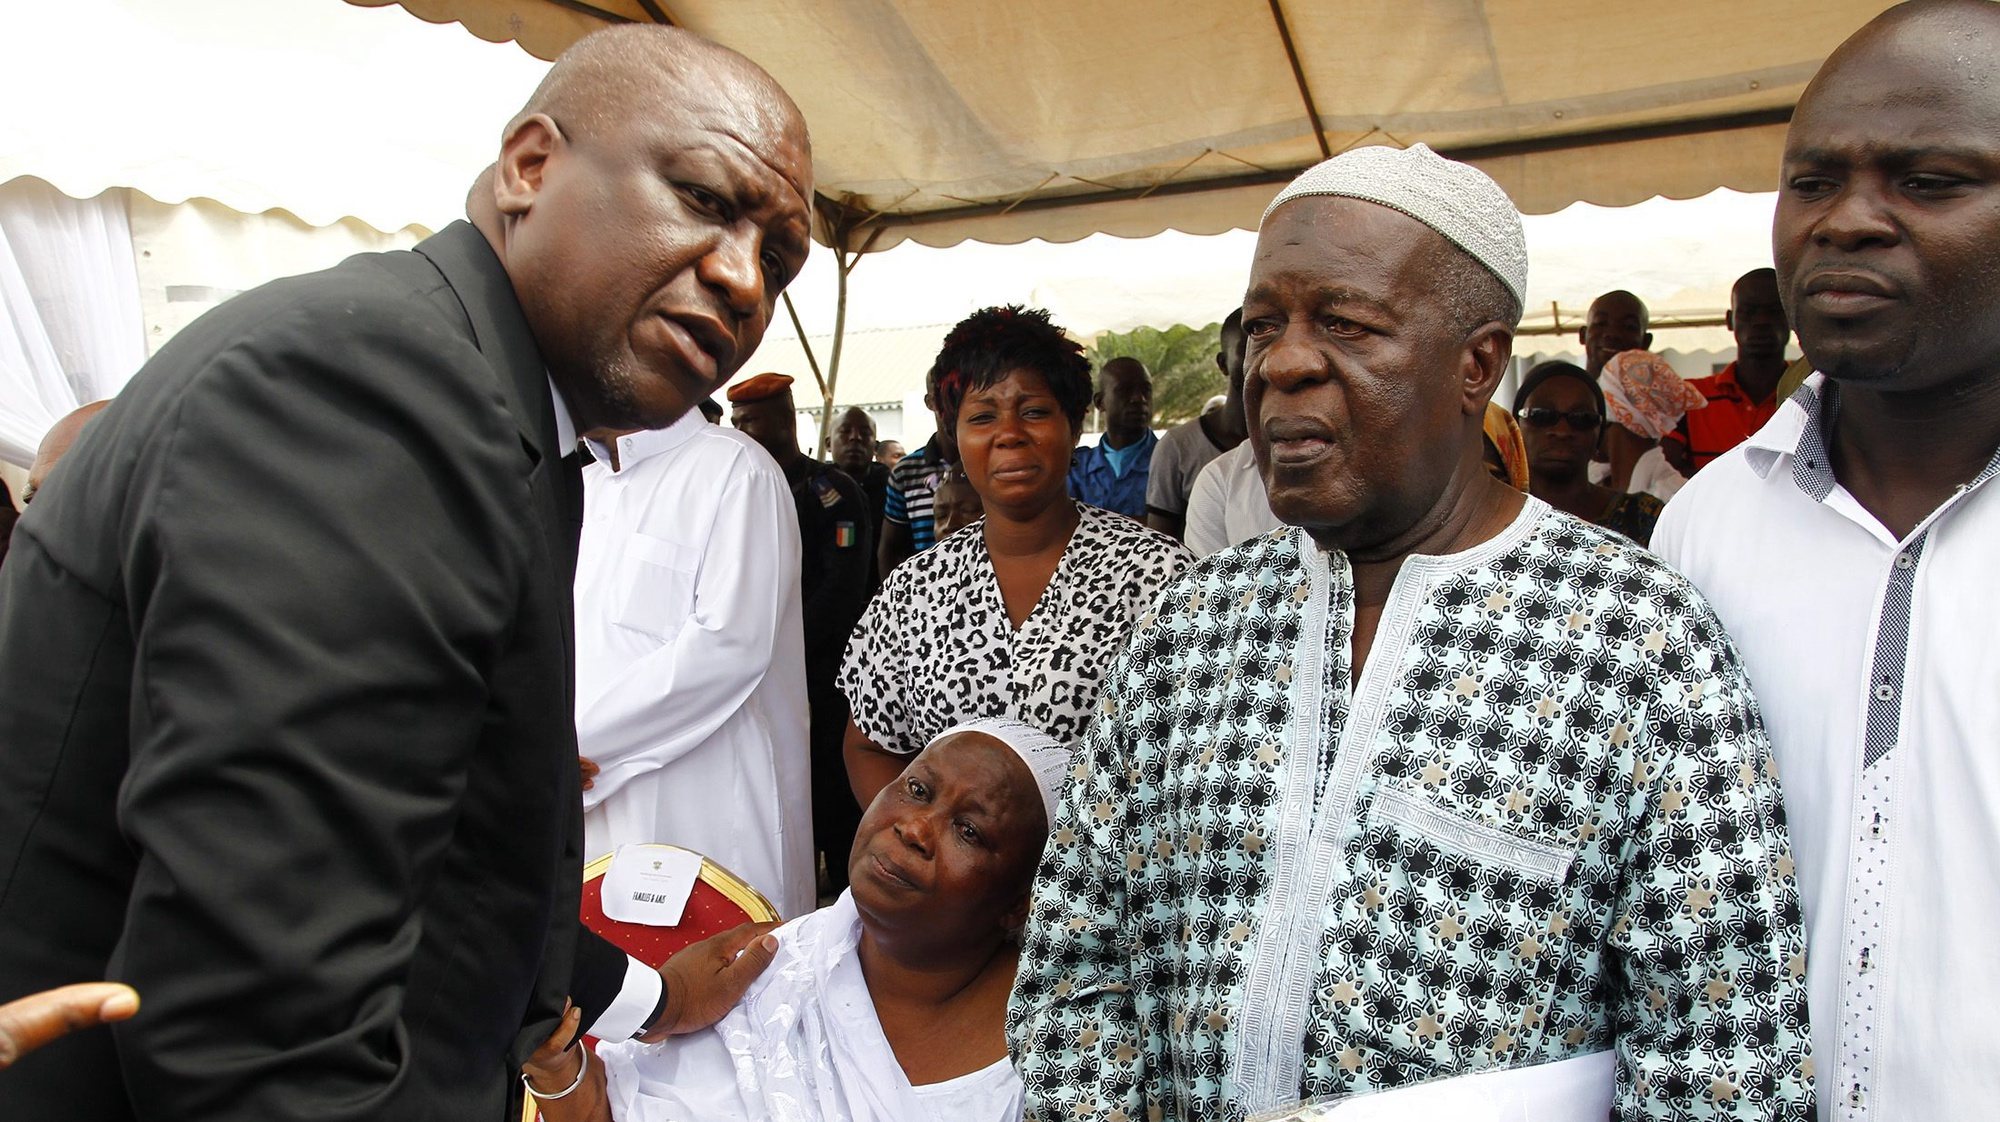 epa05249727 Ivorian minister of security and interior Hamed Bakayoko (L) comforts parents of victims who lost lives in the Grand Bassam beach attack during a ceremony to honour the victims in Abidjan, Ivory Coast, 08 April 2016. According to reports, fourteen civilians and six assailants were killed on 13 March 2016 when gunmen opened fire on guests on the beach at the Etoile du Sud hotel in the town of Grand Bassam which is popular with foreigners. Al-Qaeda in the Islamic Maghreb (AQIM) claimed responsibility for the attack. Among those killed were a French and German national.  EPA/LEGNAN KOULA